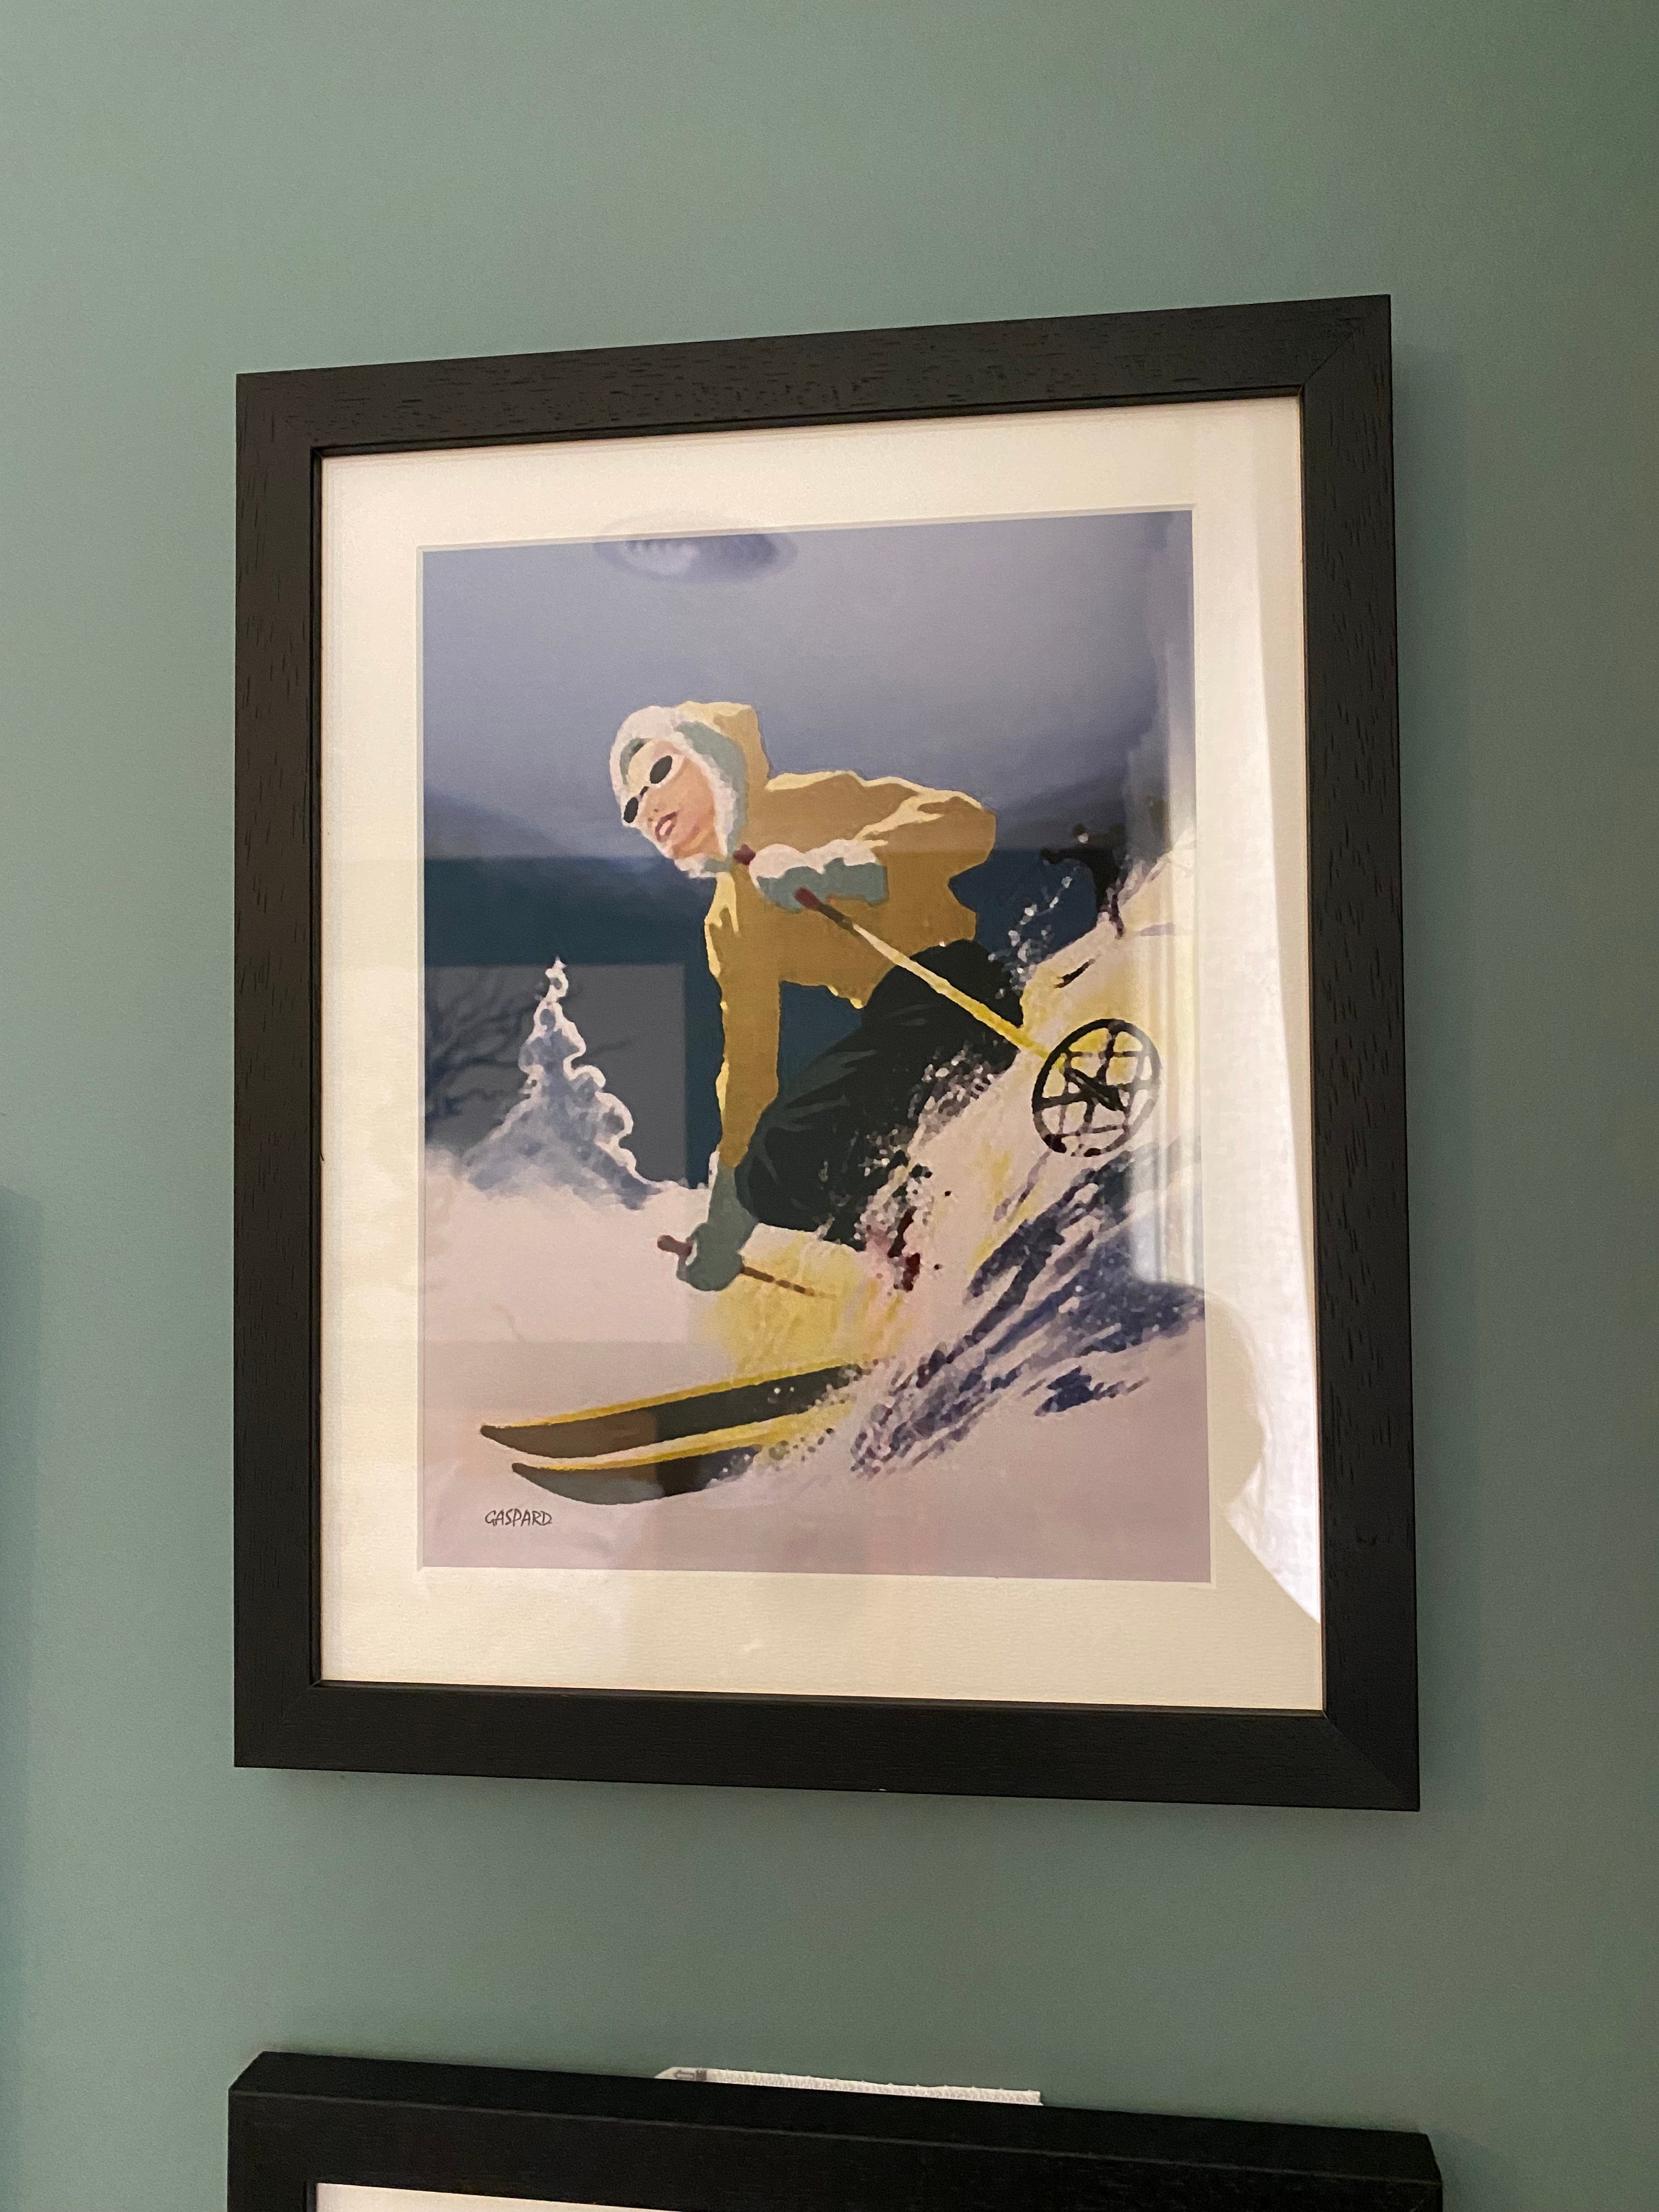 Black framed vintage photo of a woman in a yellow jacket with a white fur at the edge of the hood and blue pants skiing downhill, leaning to the right into the hill with a tree and the shadow of the mountains in the background below a blue sky, hanging on a green wall 